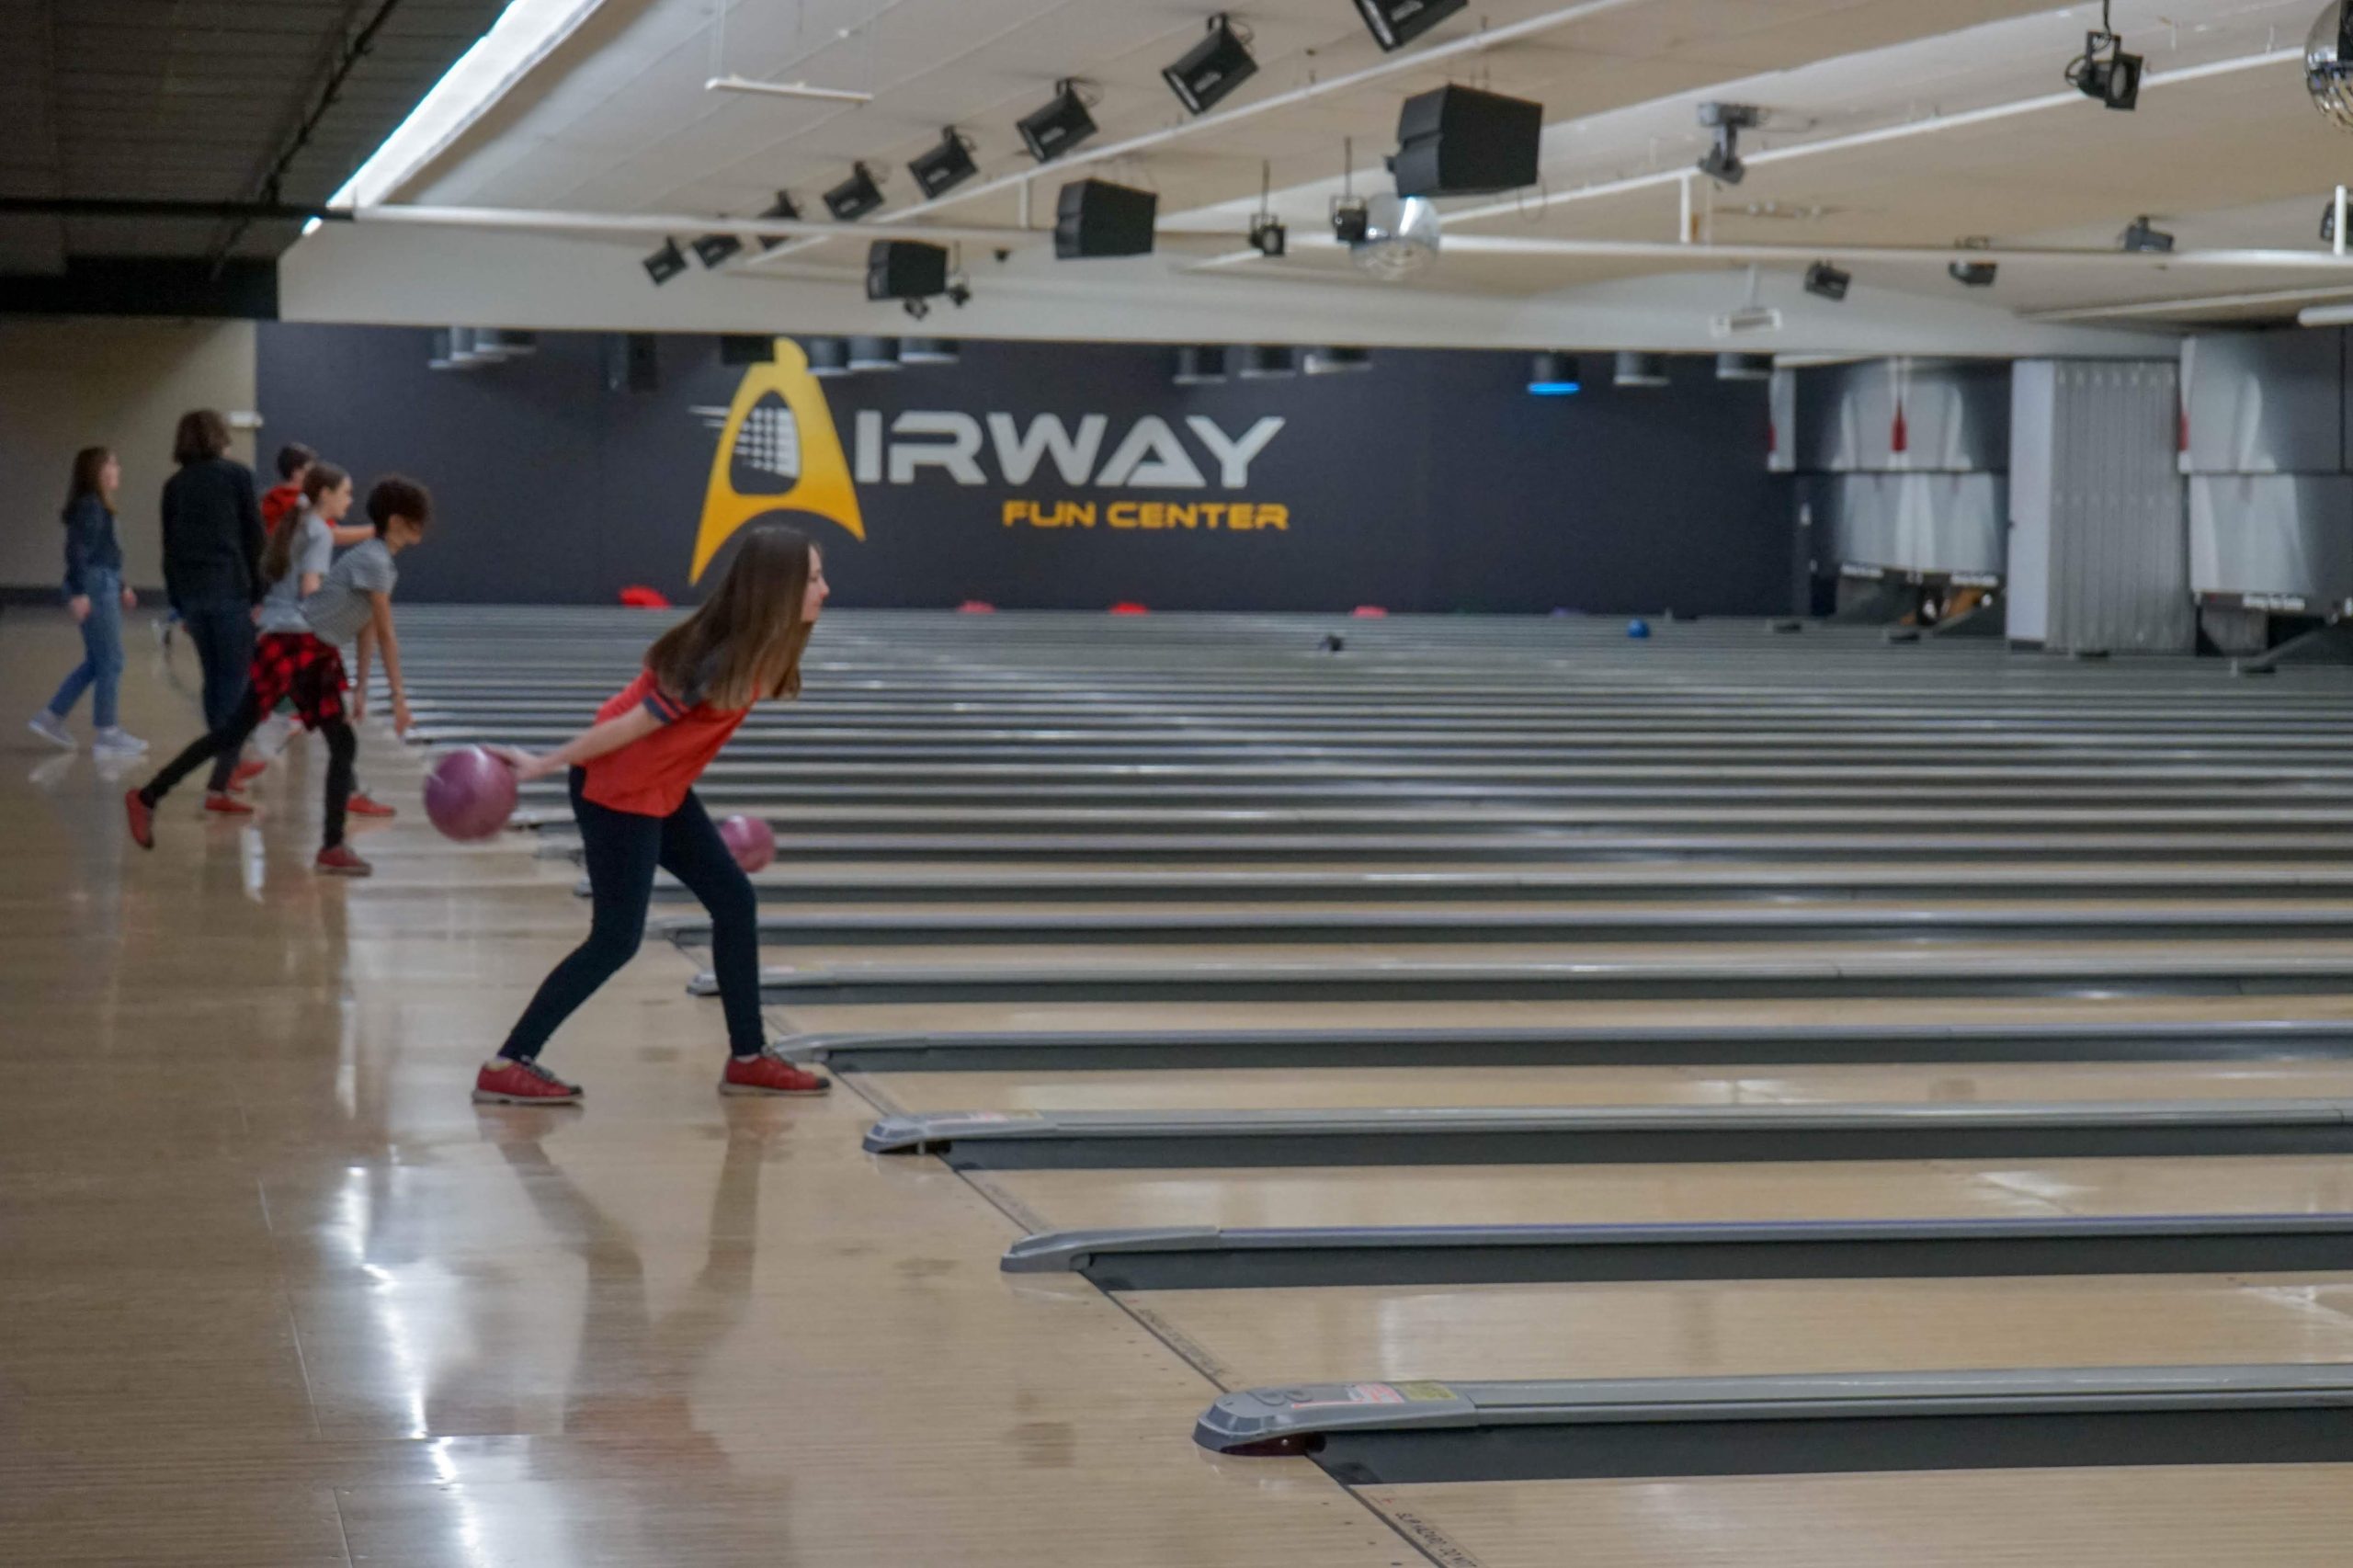 Middle school students bowl at airway lanes